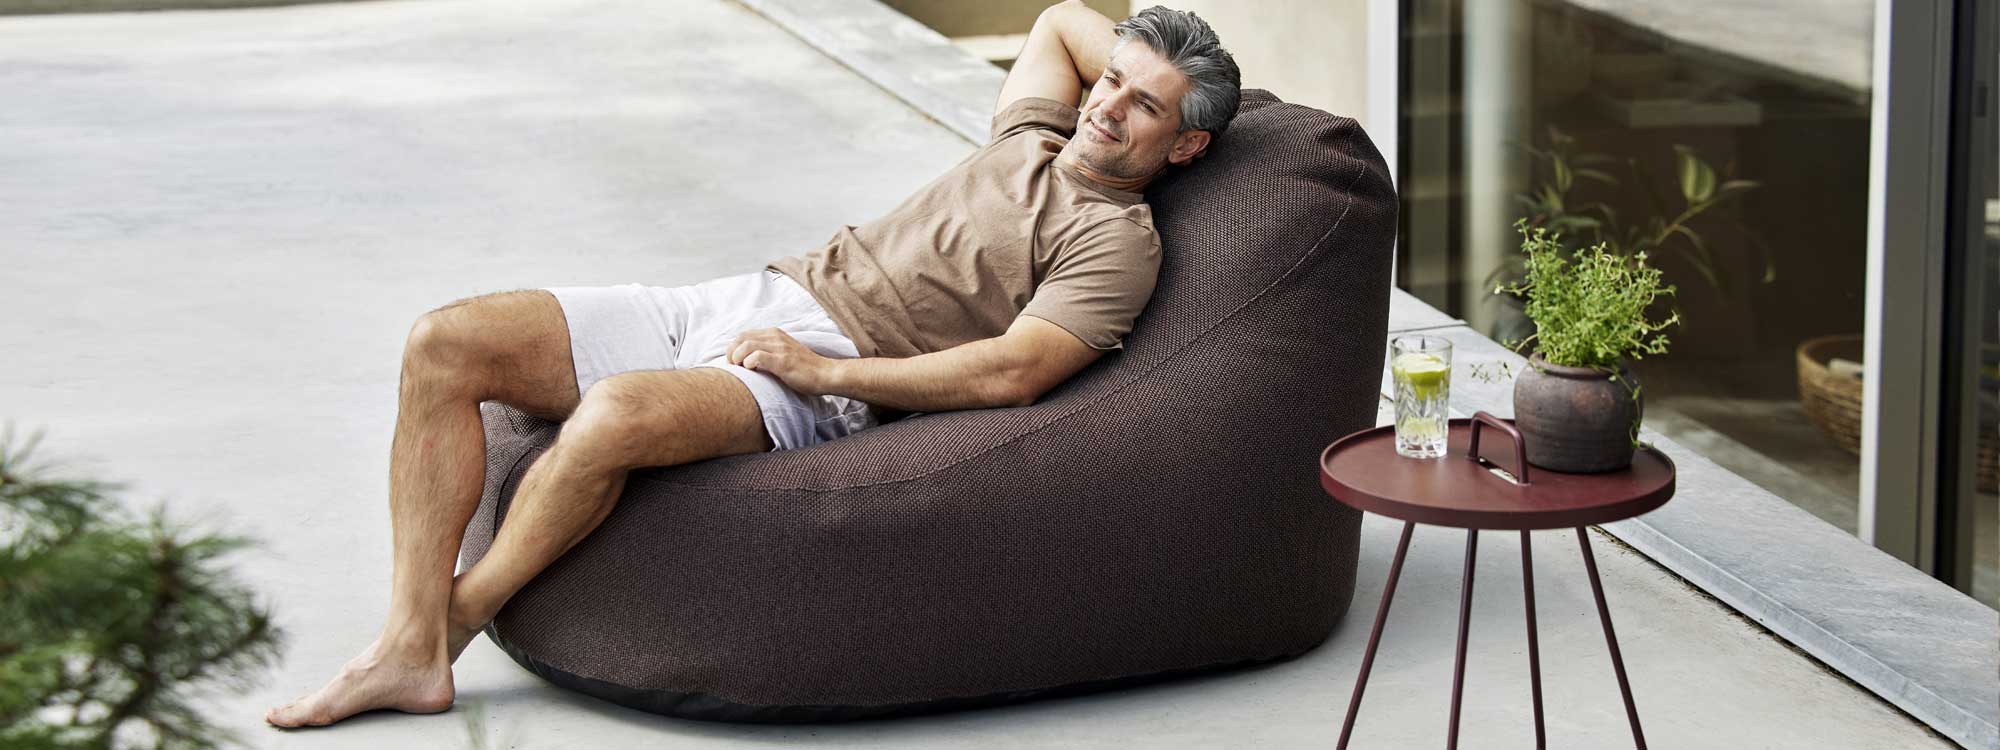 Image of man lying back in Cozy bean bag in Dark Bordeaux fabric, next to On The Move tray table by Cane-line garden furniture